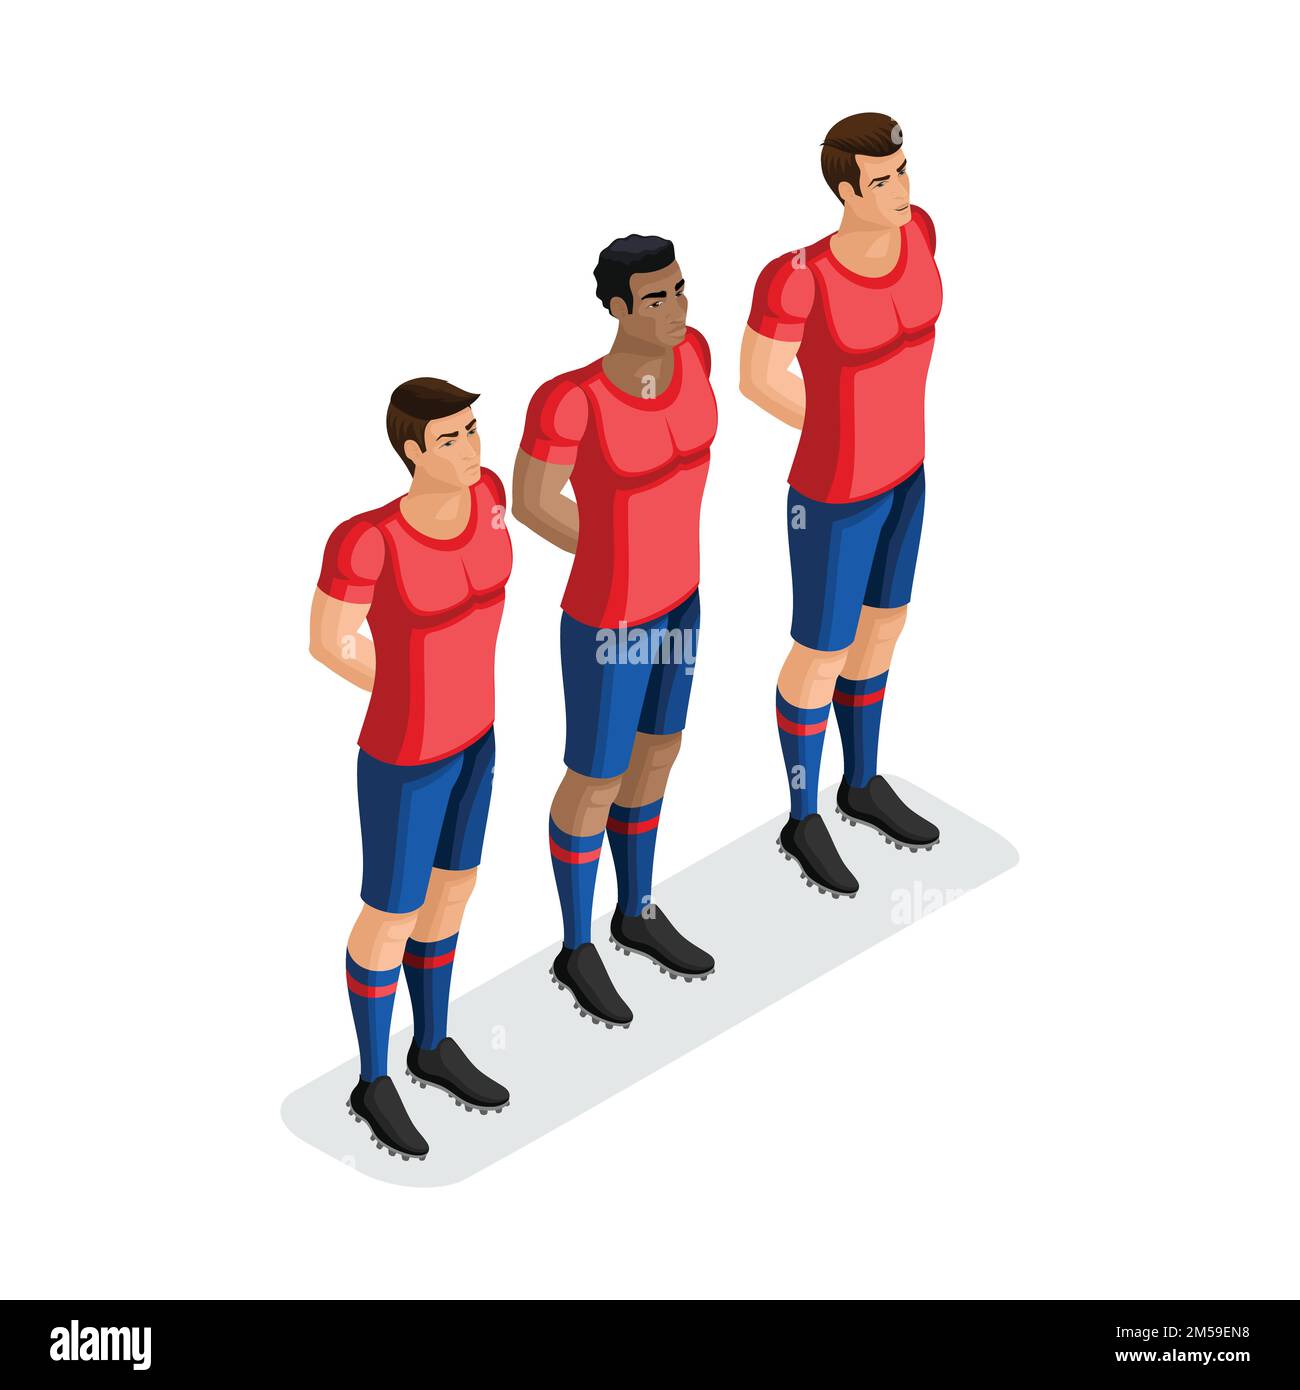 Isometric players football stand out, men of different races in one team. Football match, set 2. Stock Vector